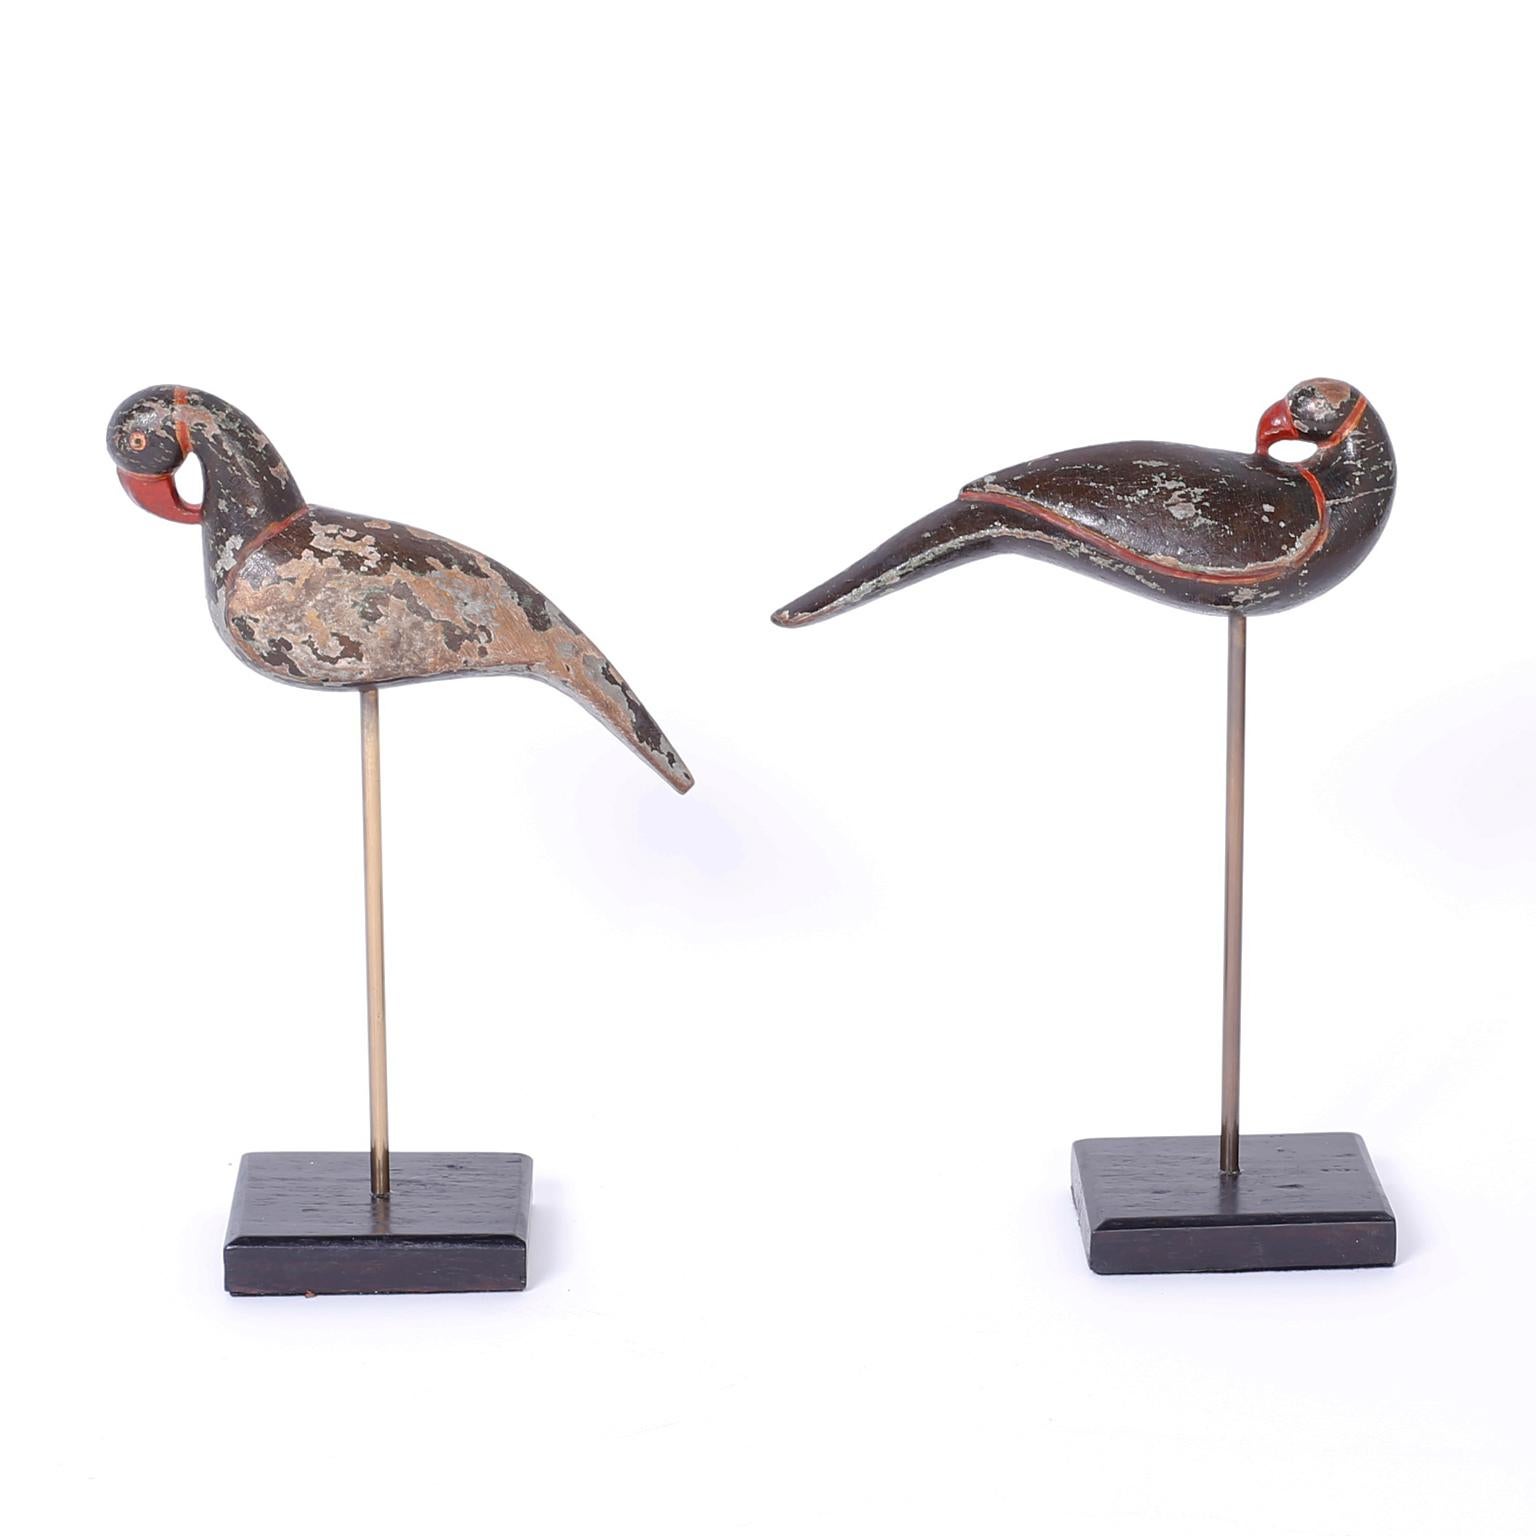 Amusing pair of antique anglo Indian birds with a folky charm that have been carved from indigenous hardwood and painted a long ago, now with a rustic patina. Presented on custom stands.